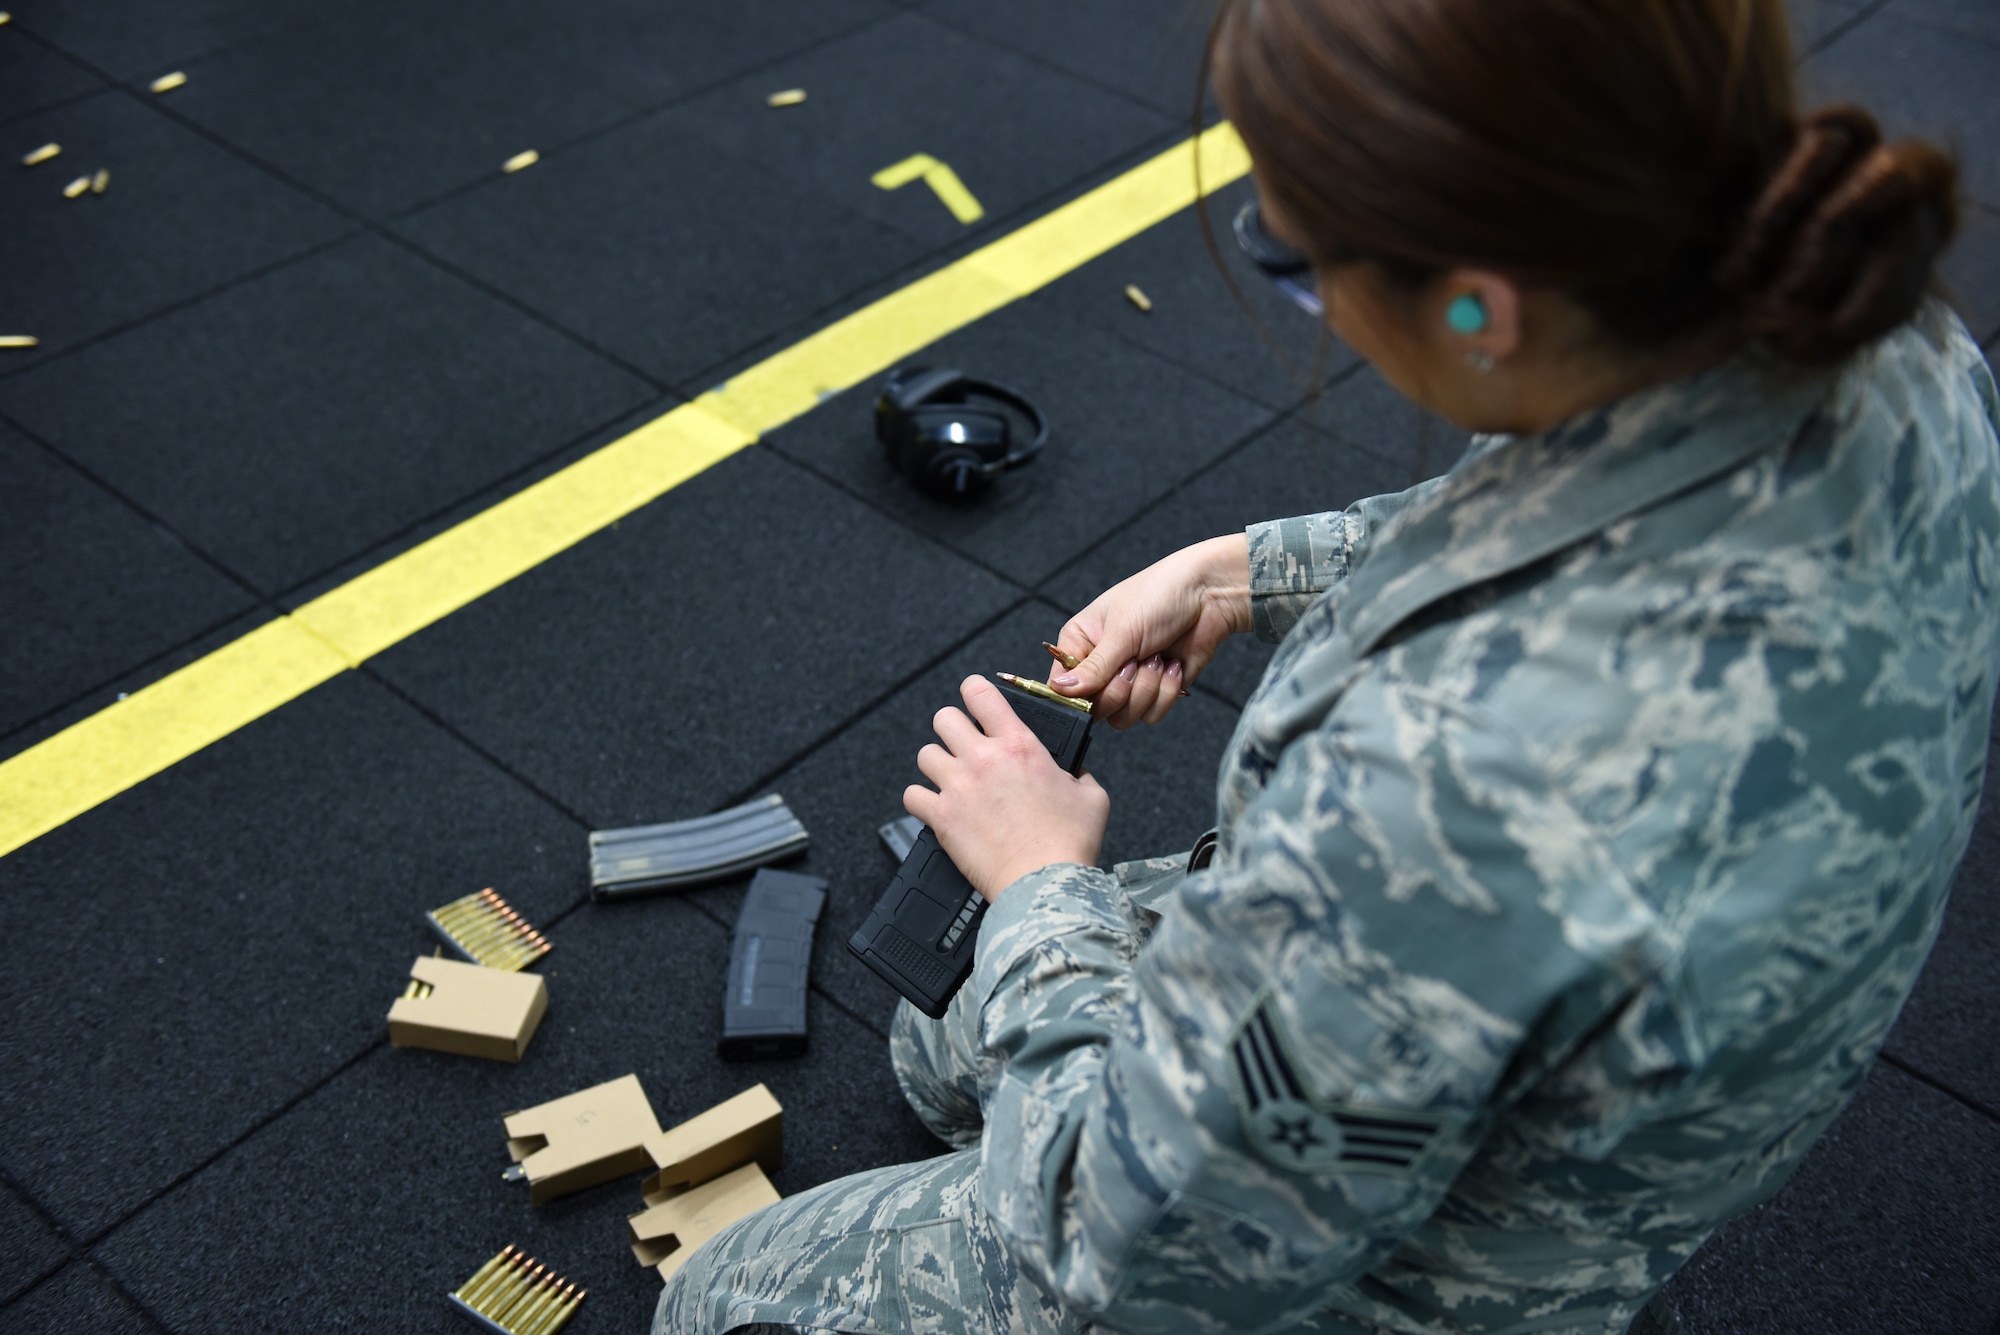 Senior Airman Conner Phillips, a munitions systems technician assigned to the 180th Fighter Wing, Ohio Air National Guard, loads ammunition during the first weapons qualification class in the new Modular Small Arms Range in Swanton. Ohio, Nov. 30, 2018. The high-tech facility is climate-controlled, has high efficiency air handlers, bullet traps and multiple simulation options that will promote safety, while providing scenario-based shooting situations for personnel to train and meet readiness requirements. (Air National Guard Photo by Senior Airman Hope Geiger)